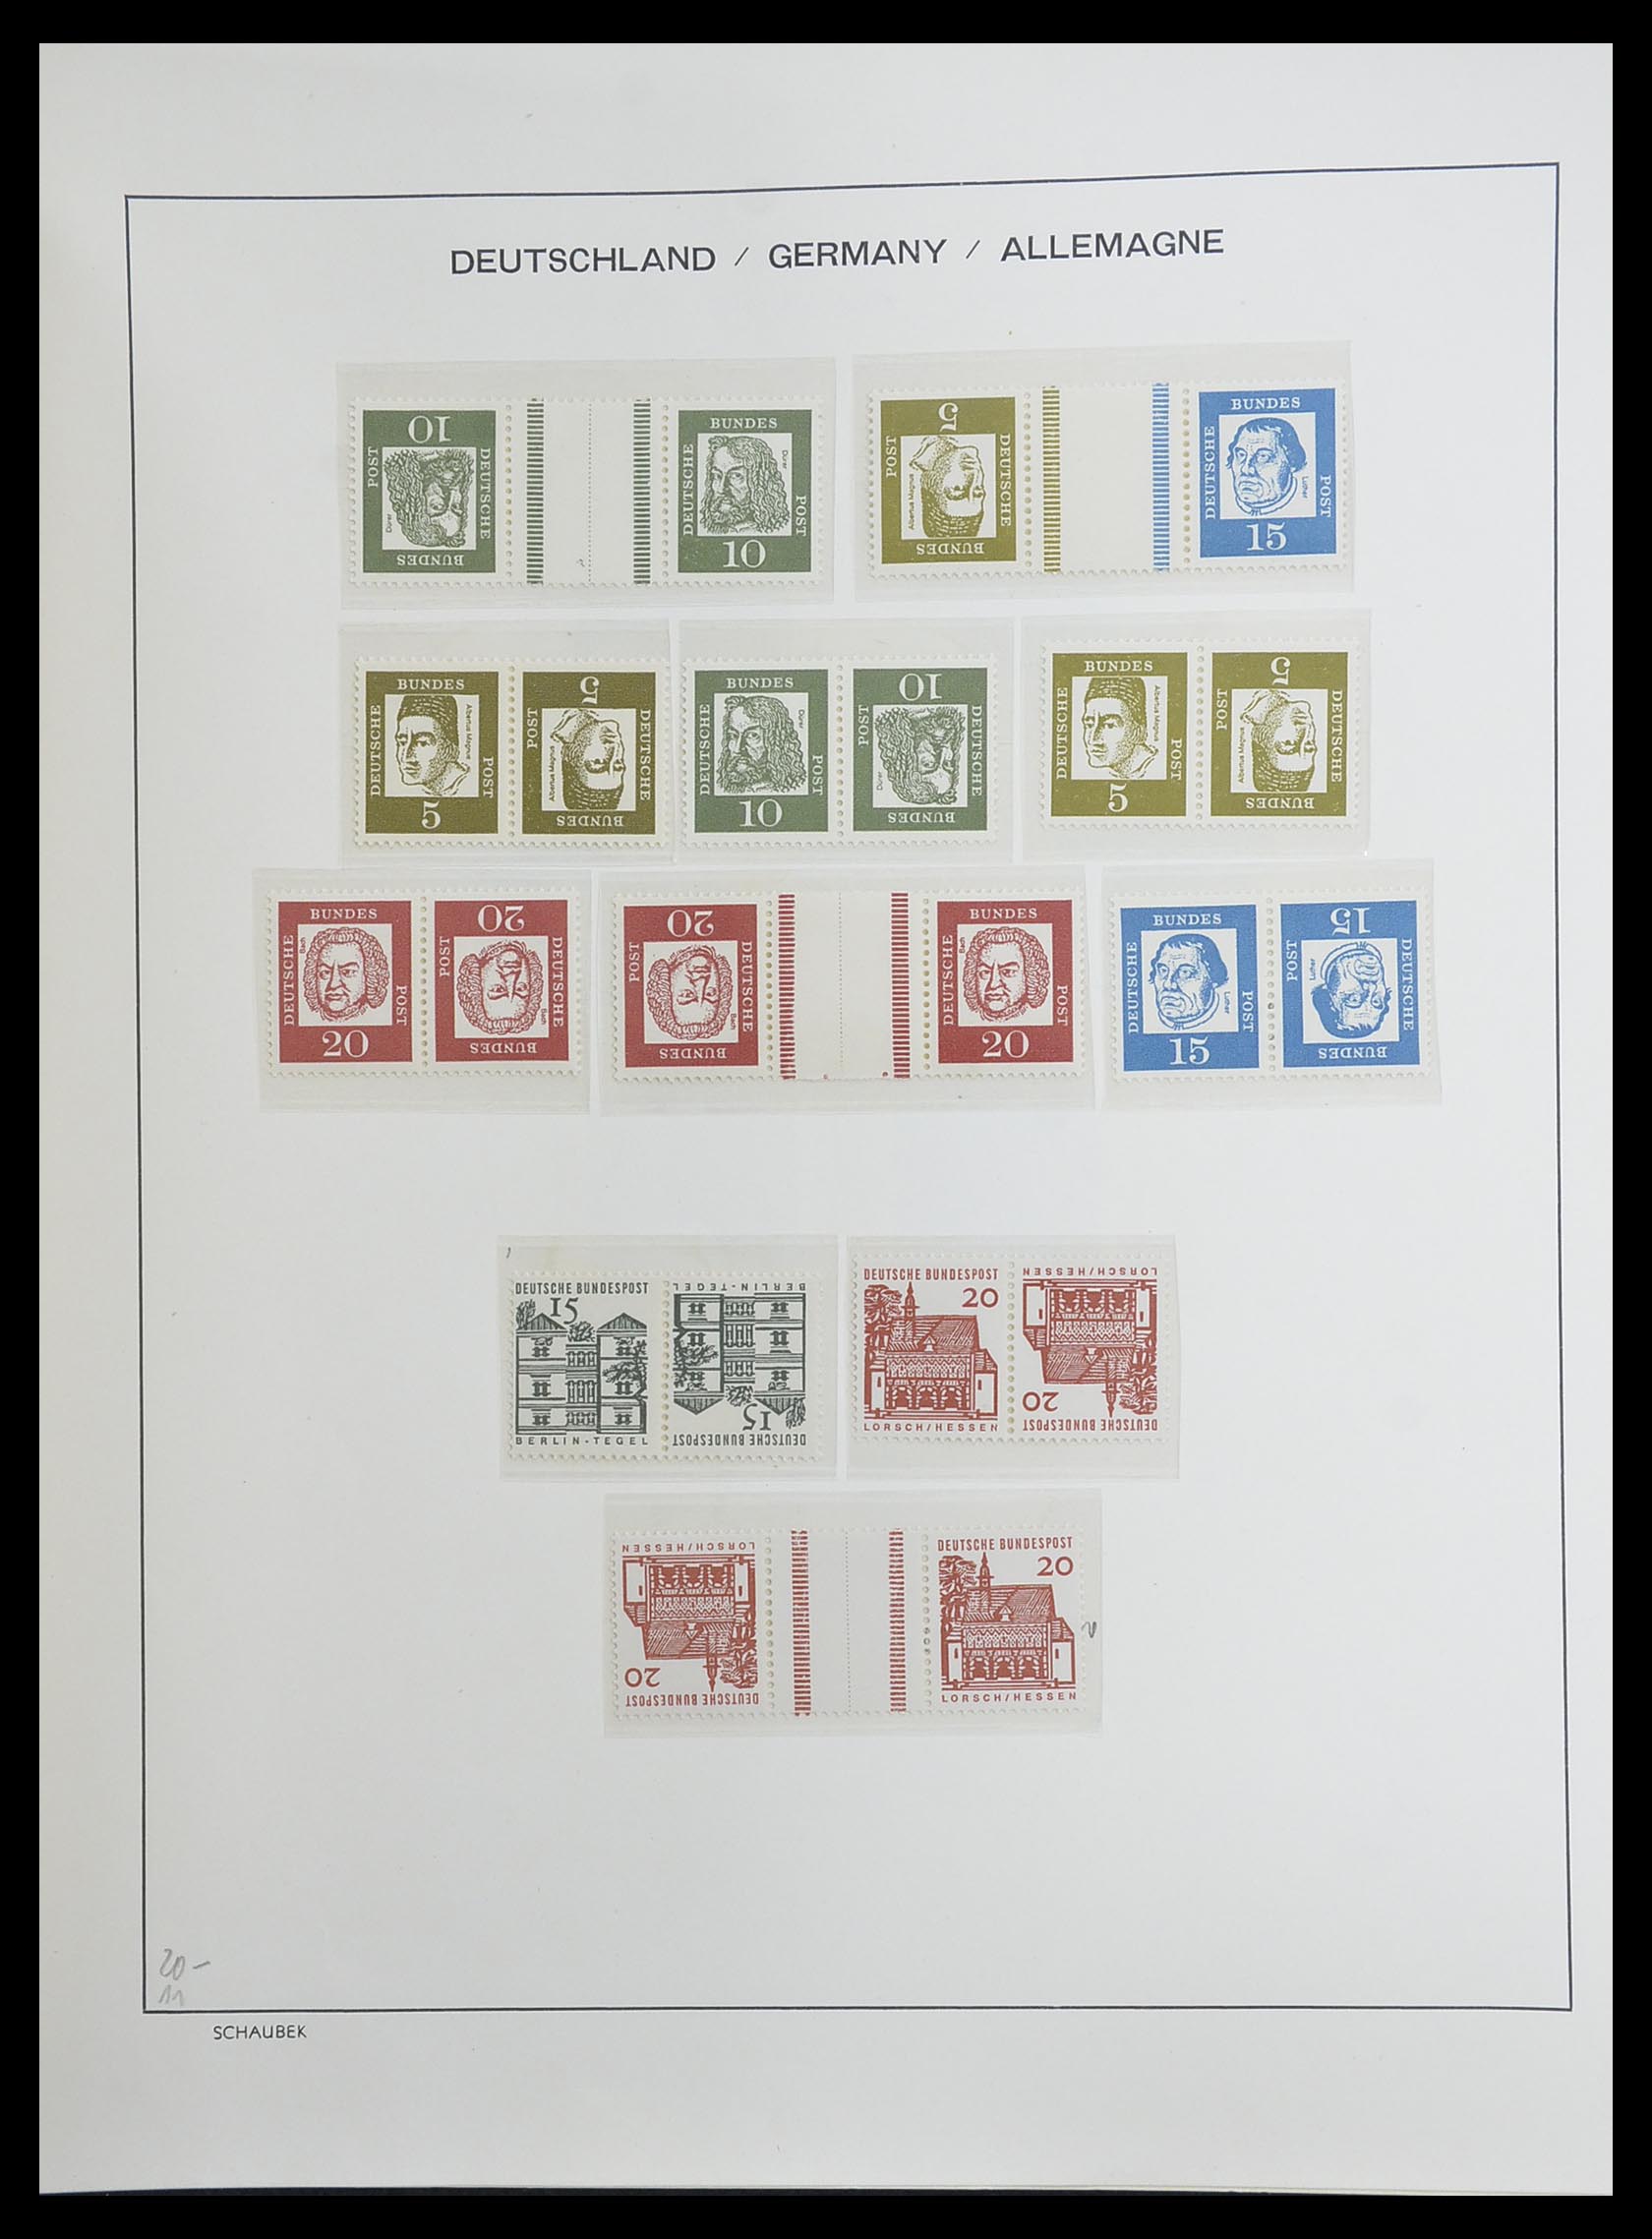 33276 033 - Stamp collection 33276 Bundespost 1949-1995.